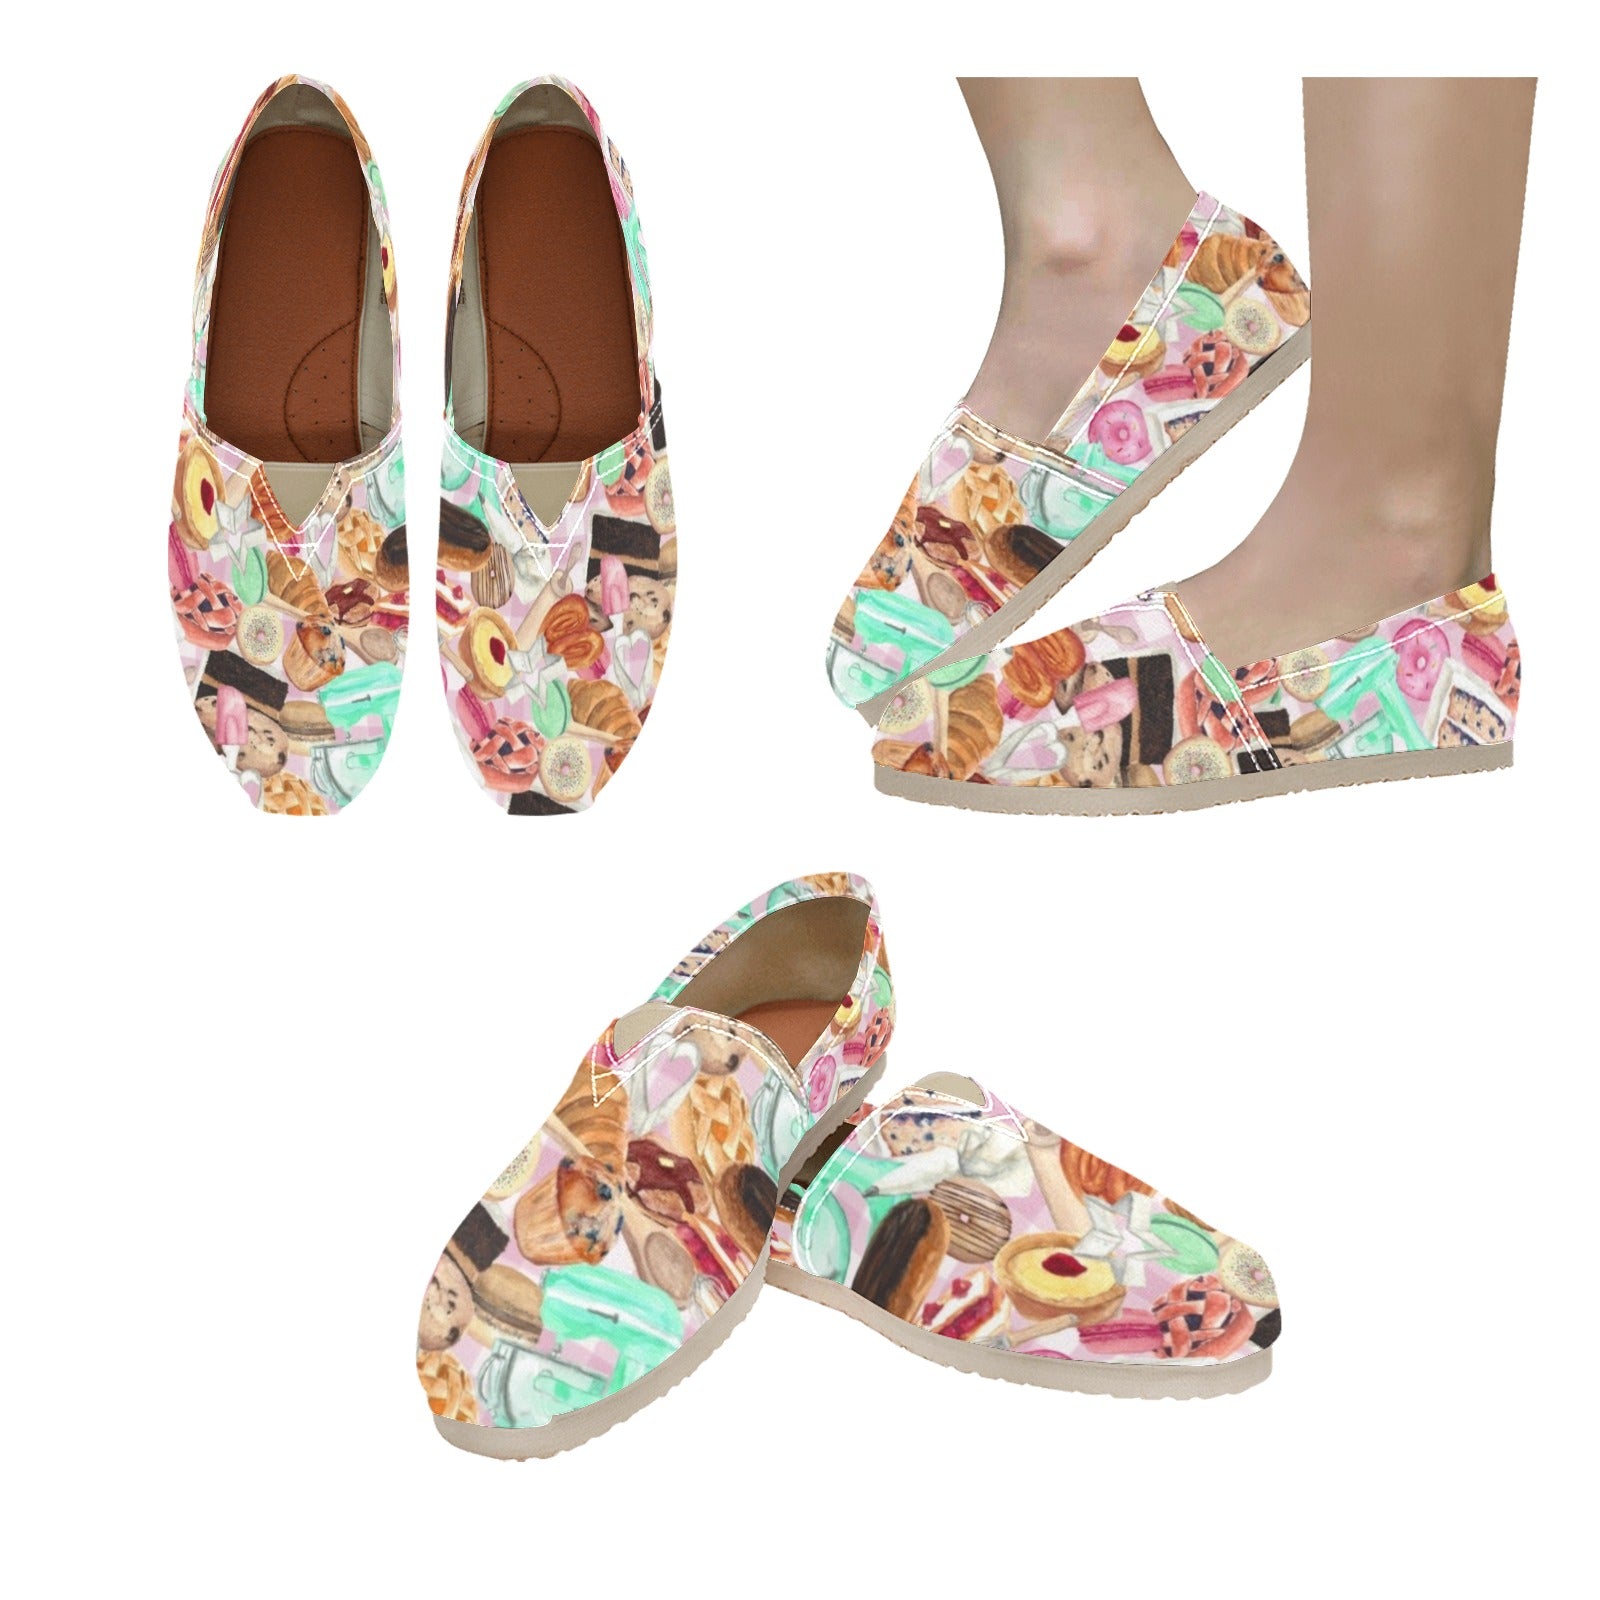 Bakery - Casual Canvas Slip-on Shoes